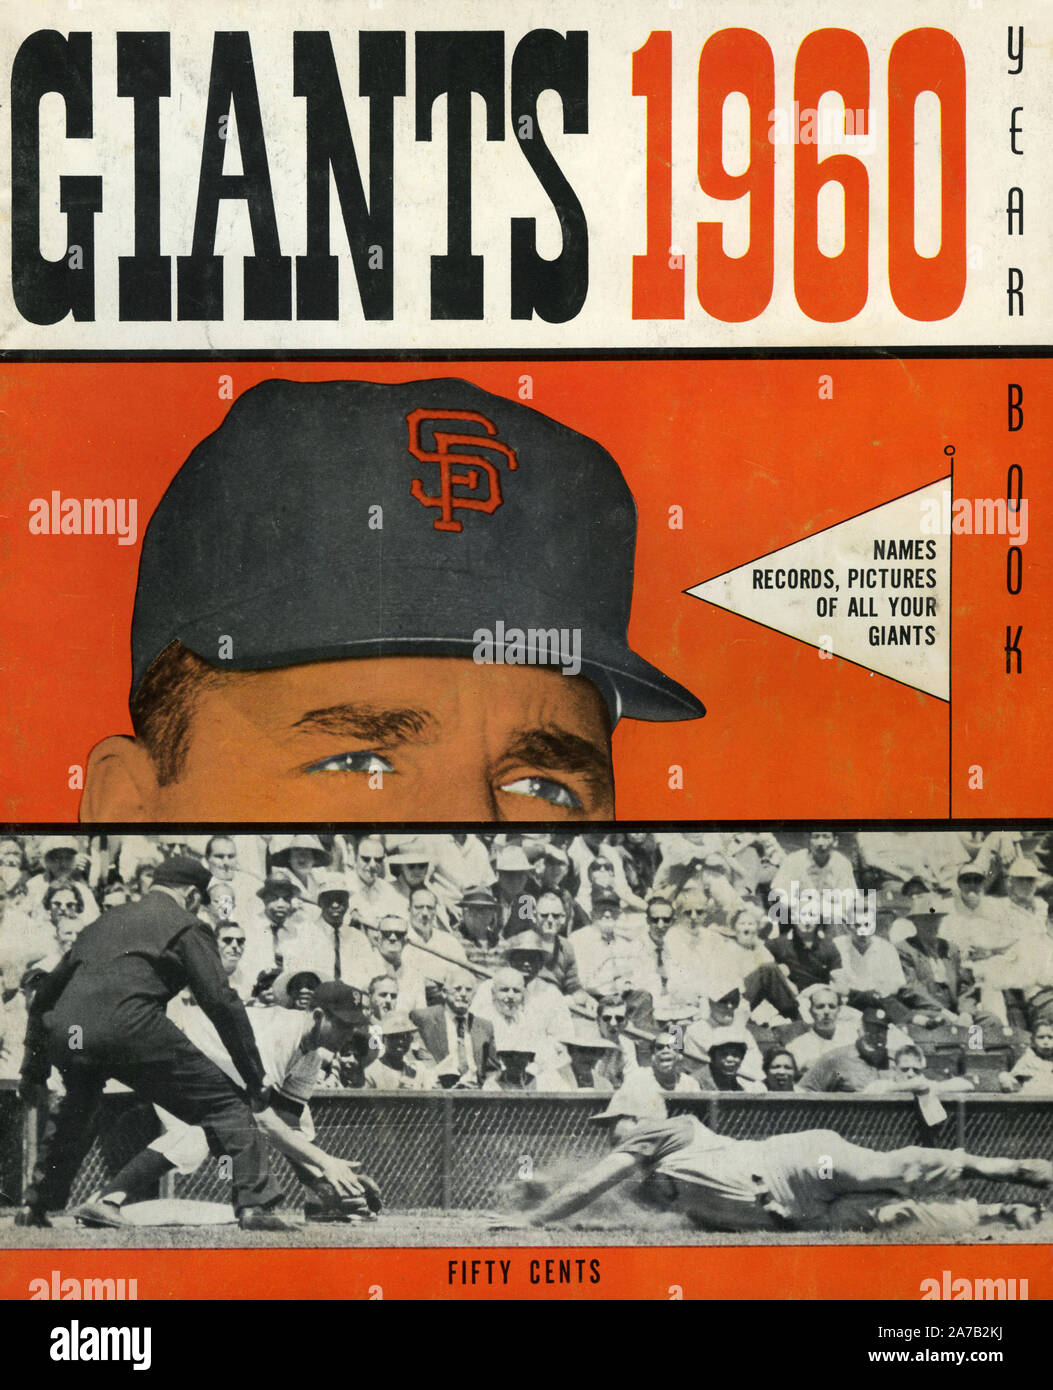 The cover of the San Francisco Giants baseball team 1960 yearbook. Stock Photo